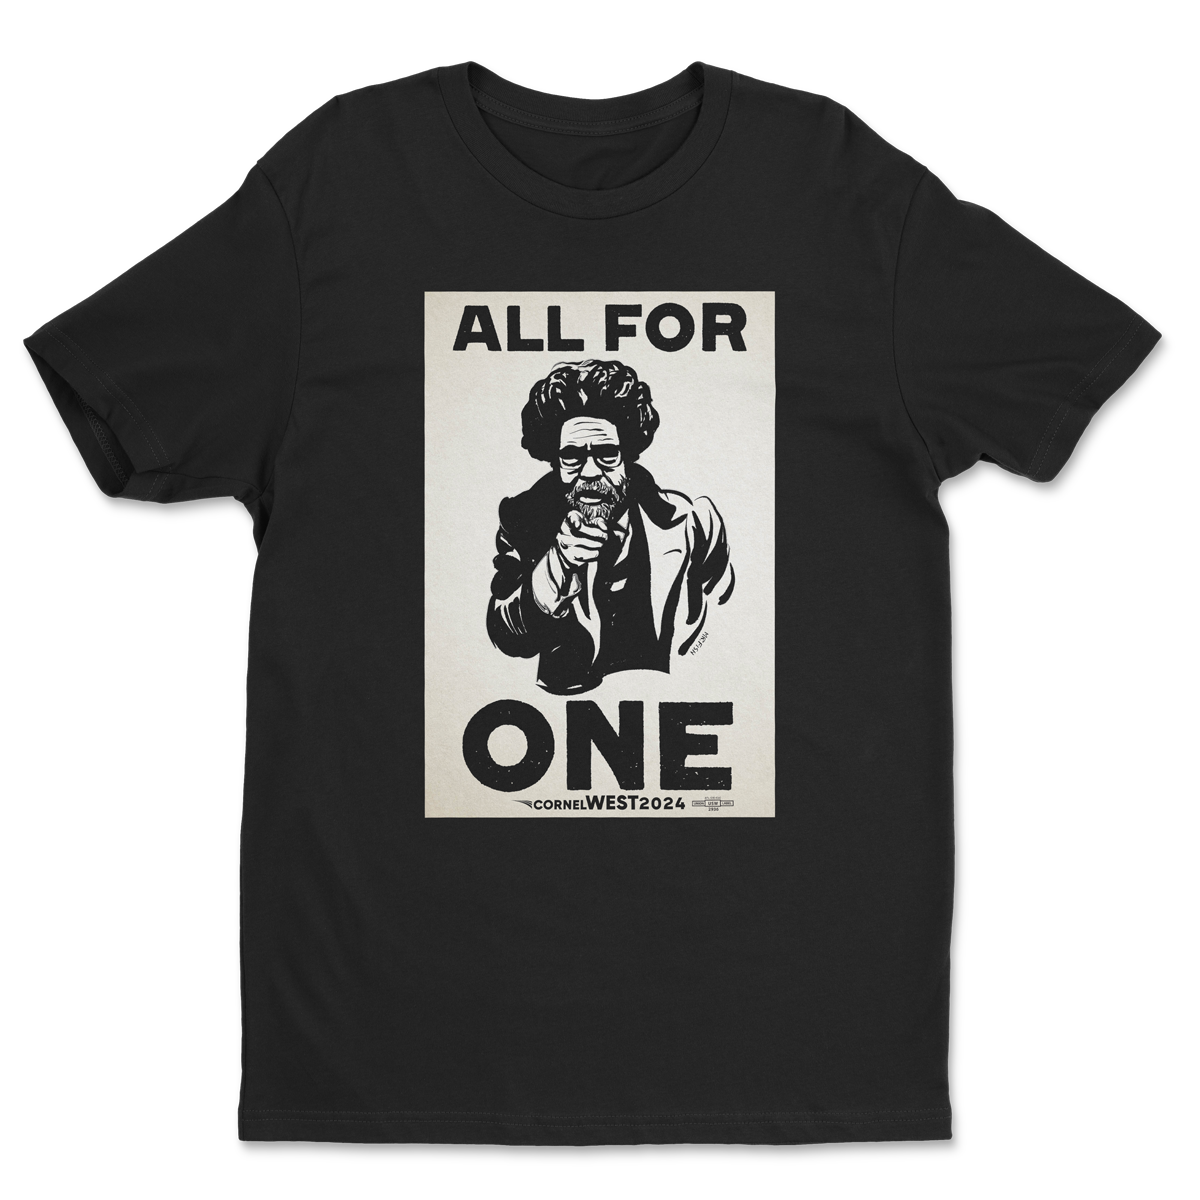 All For One Tee